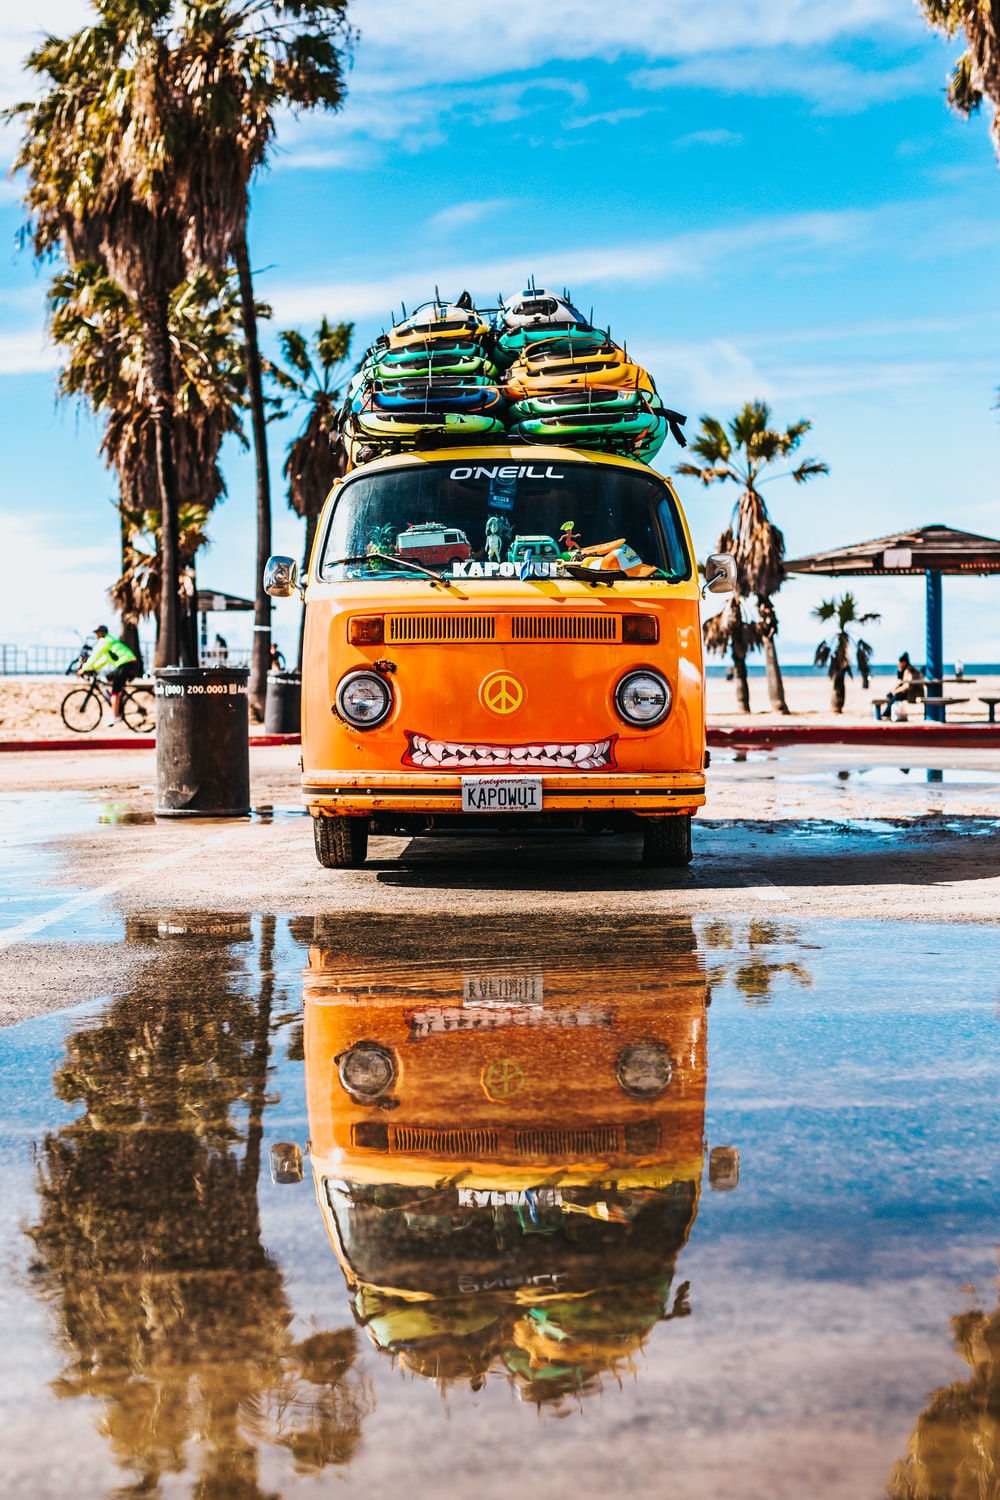 Vw Bus Picture. Download Free Image